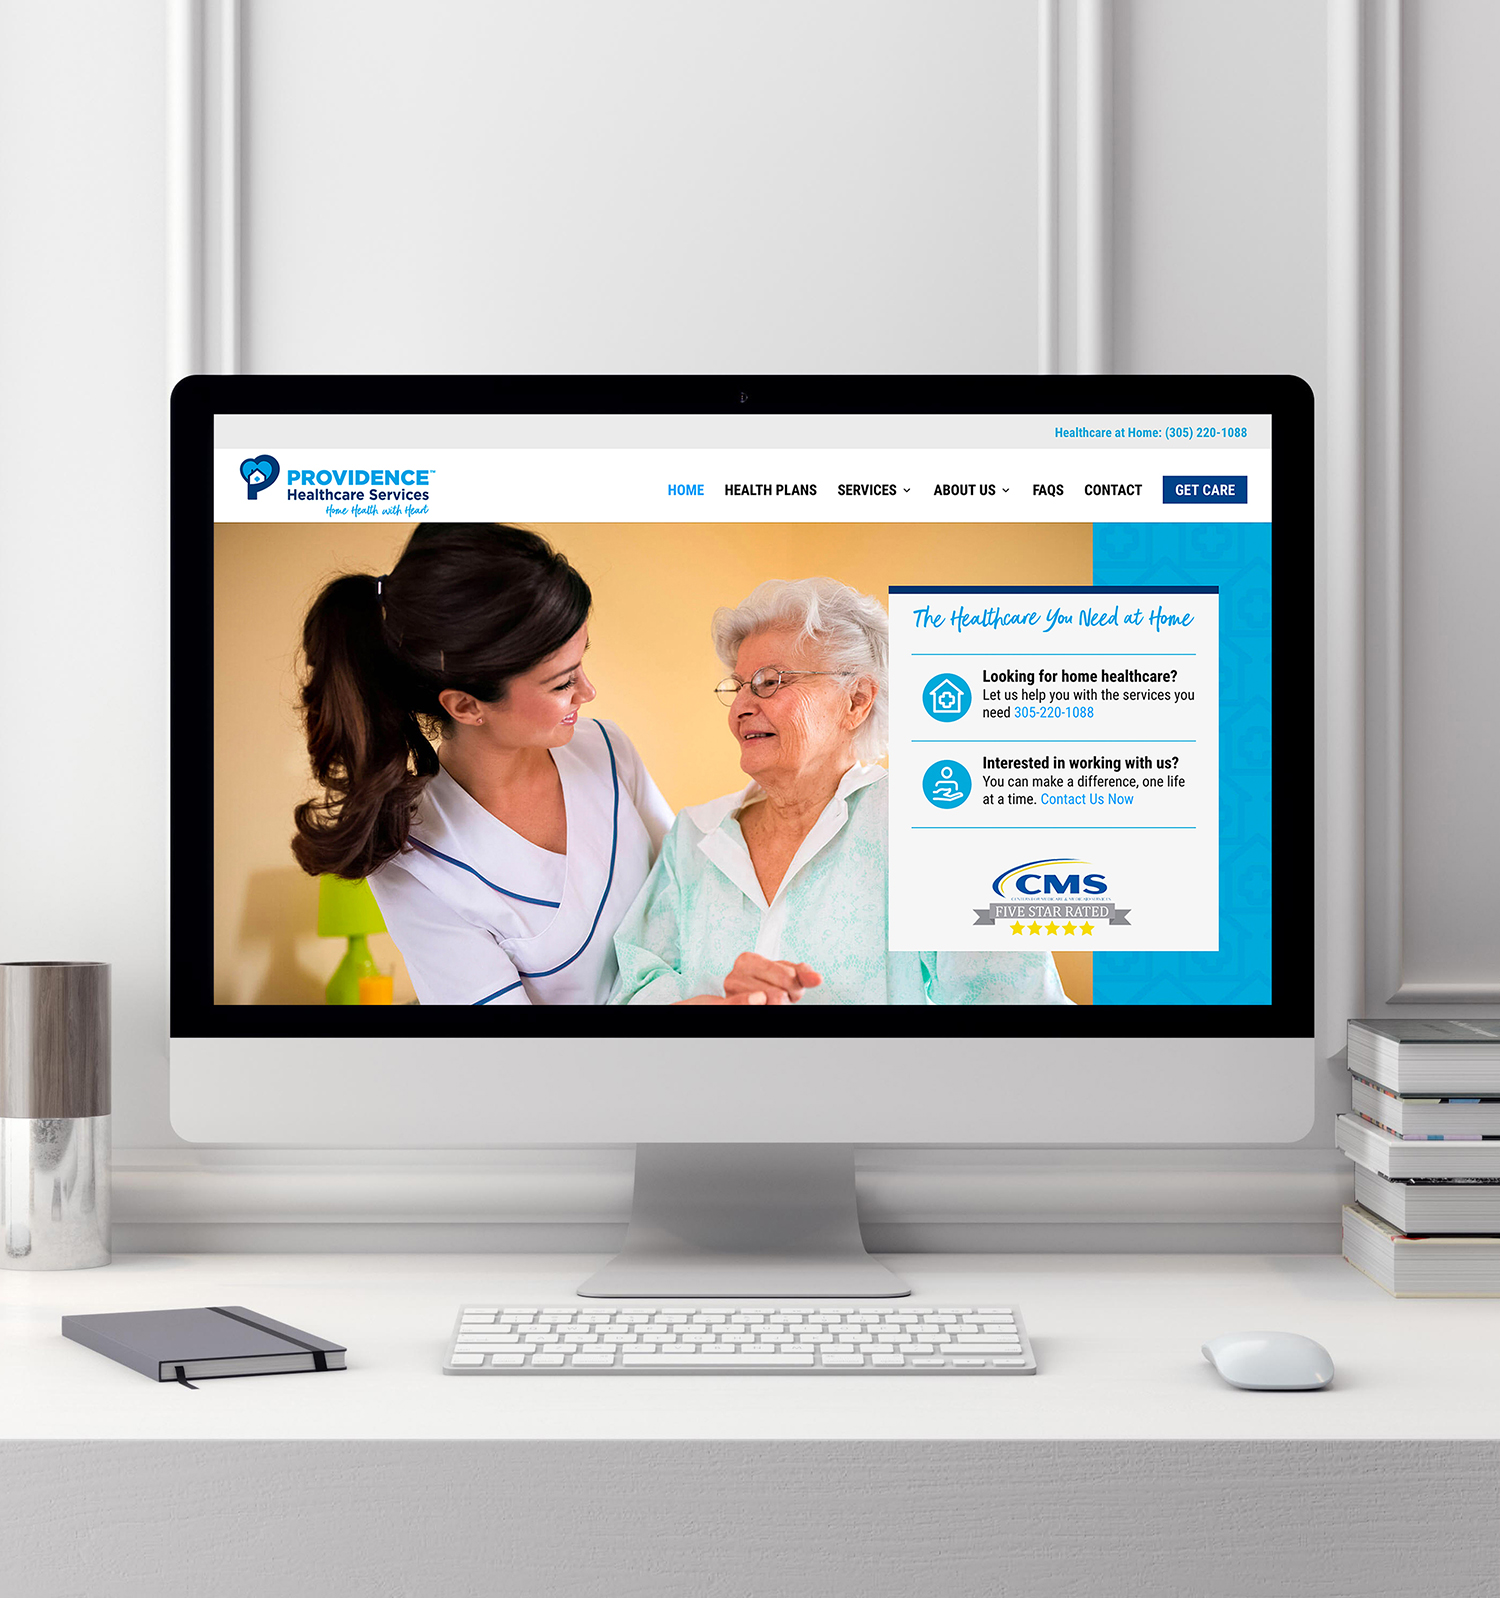 Providence healthcare services website